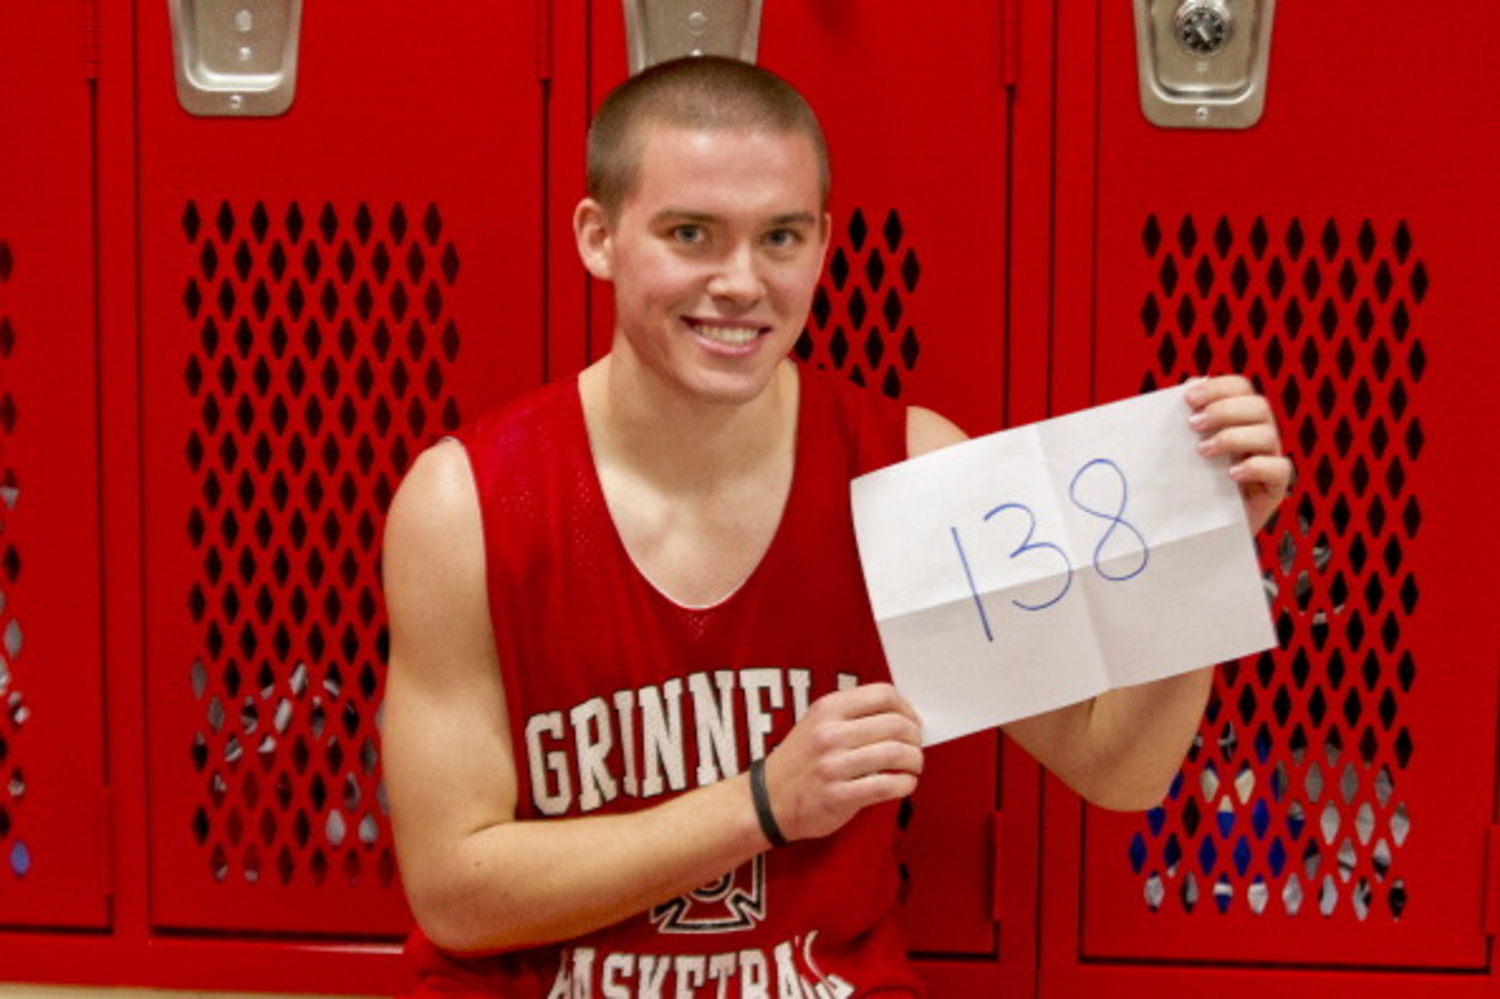 What Happened to Jack Taylor, the College Basketball Player Who Scored 138 Points in a Game?